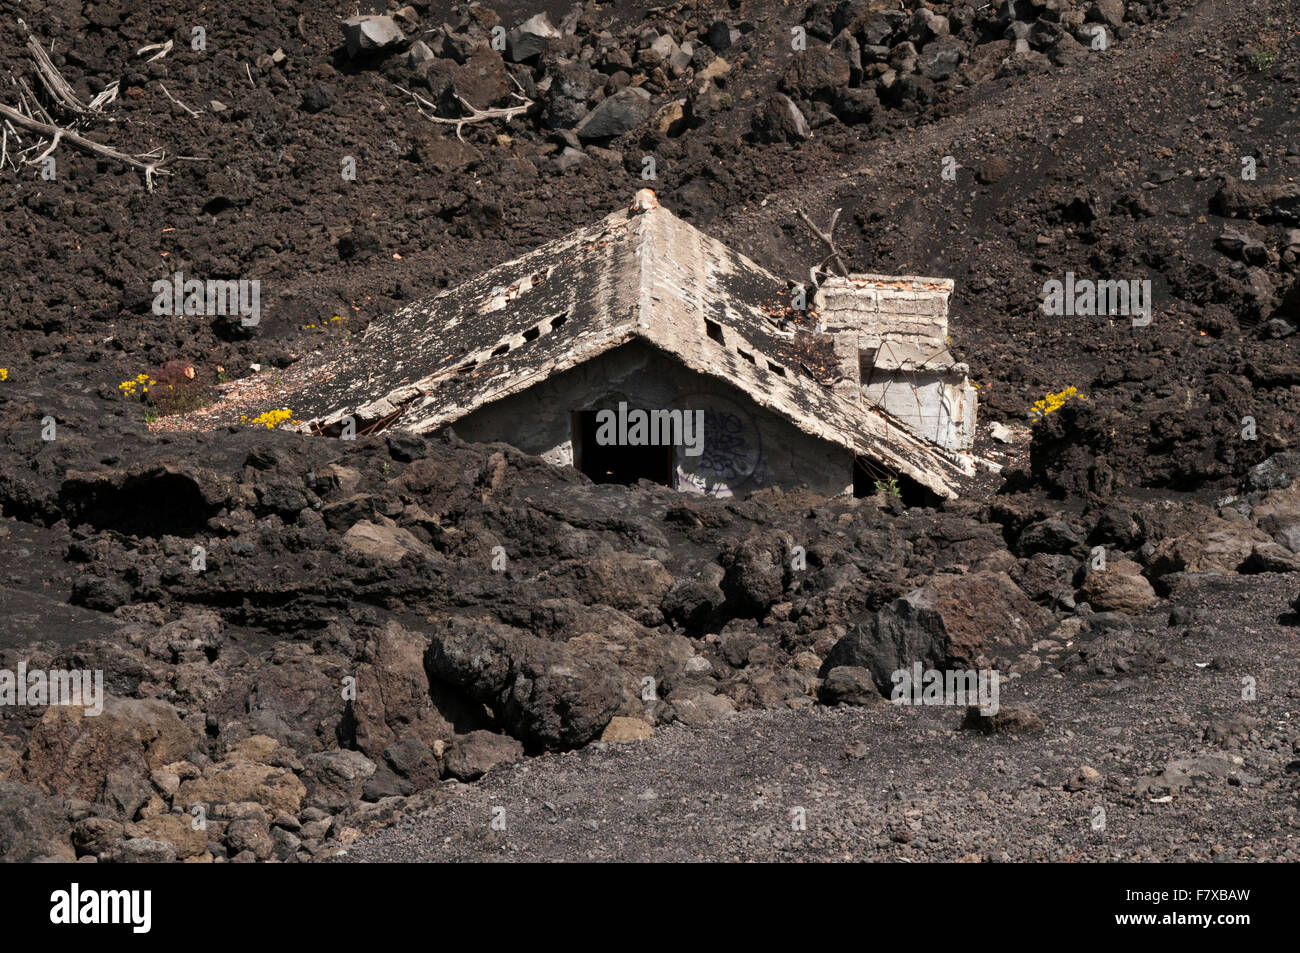 3300 meter high Mount Etna on the east coast of Sicily buried this house in 1987 in one of its lava flows. Stock Photo